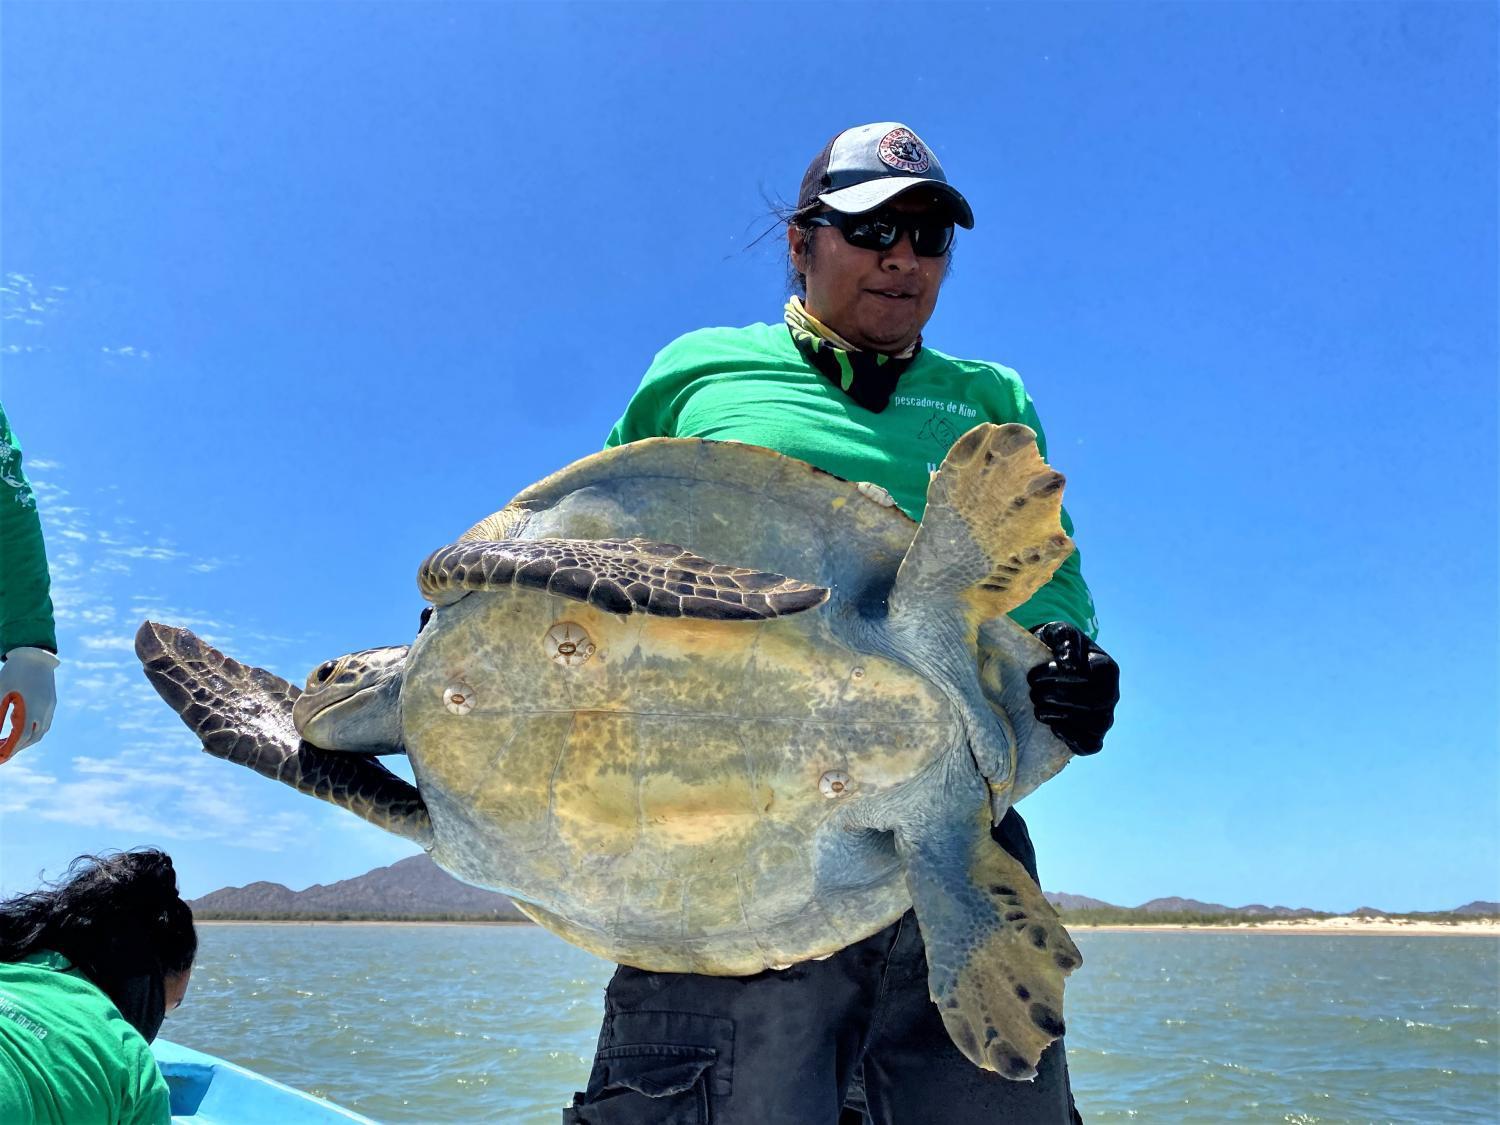 Alfonso Morales lifts a sea turtle to place it in the bottom of the boat, where it will stay until the crew reaches the shore.